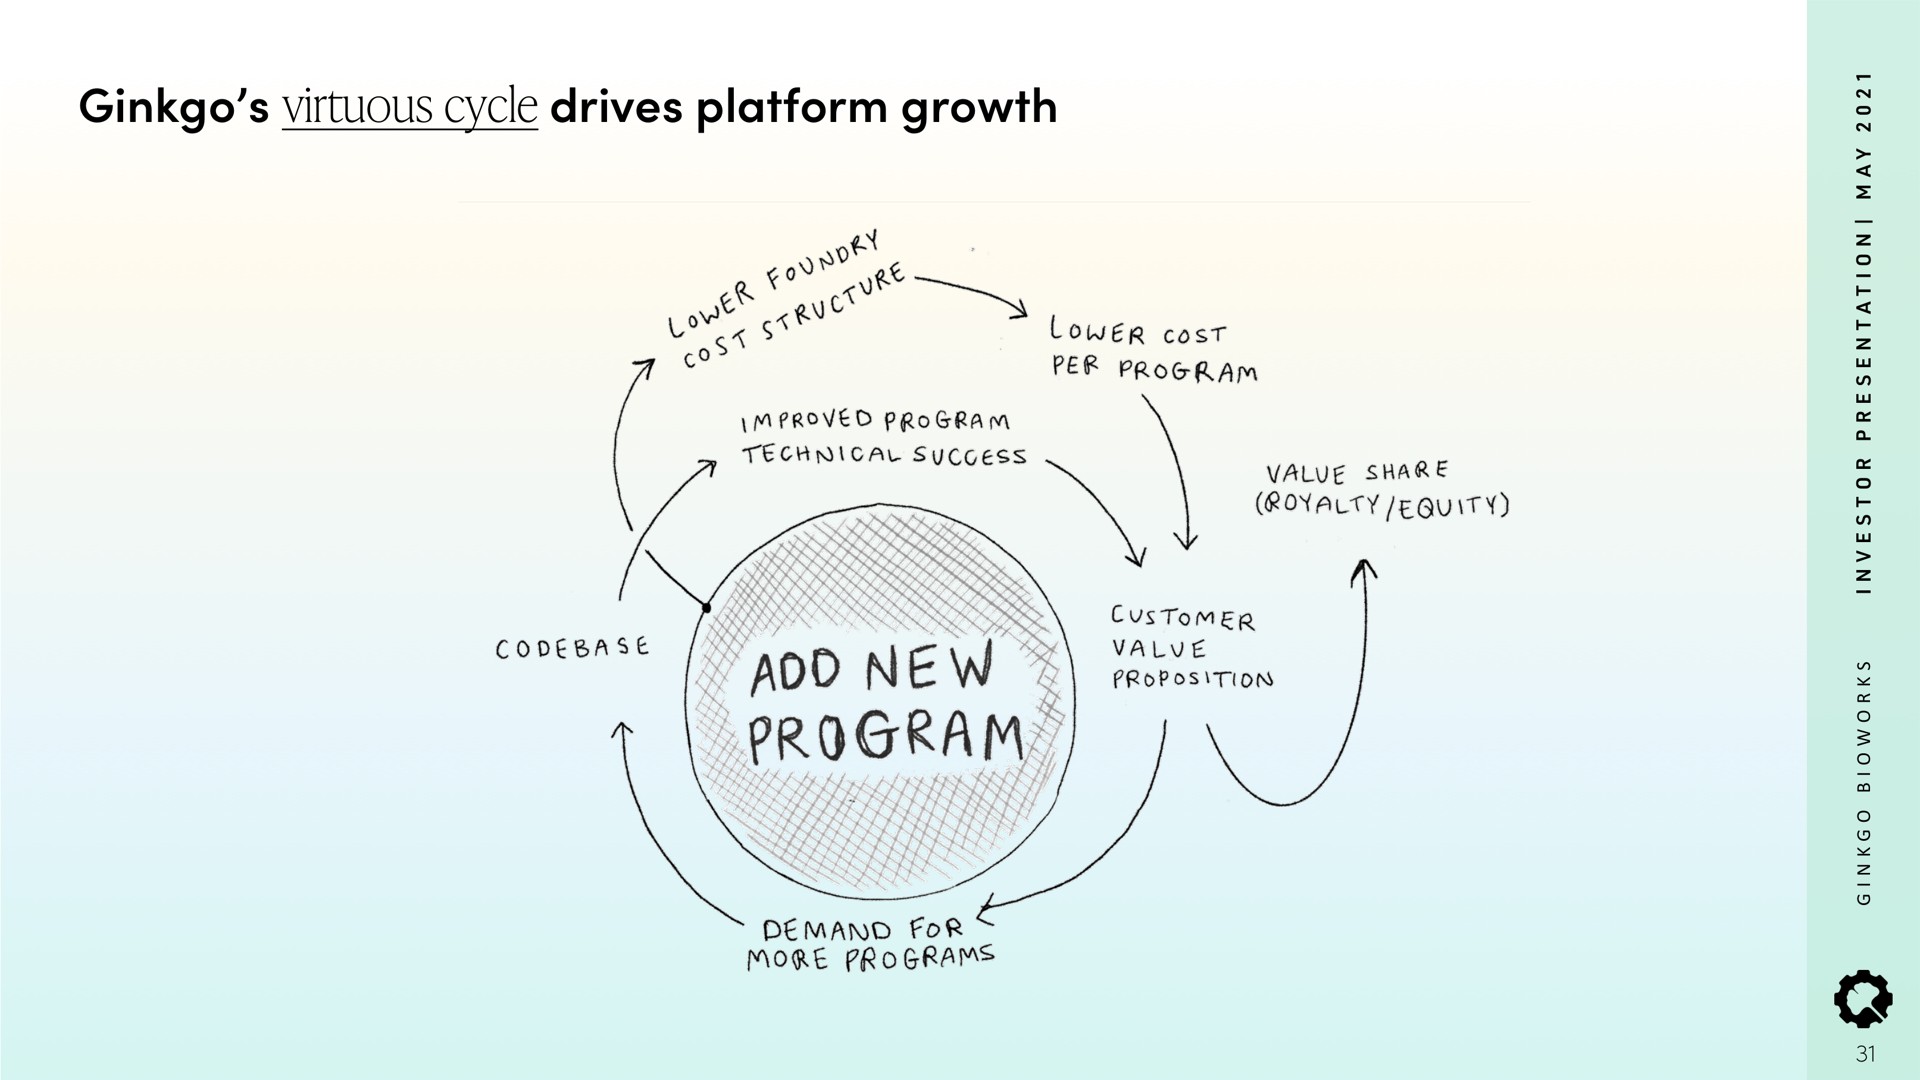 ginkgo virtuous cycle drives platform growth | Ginkgo